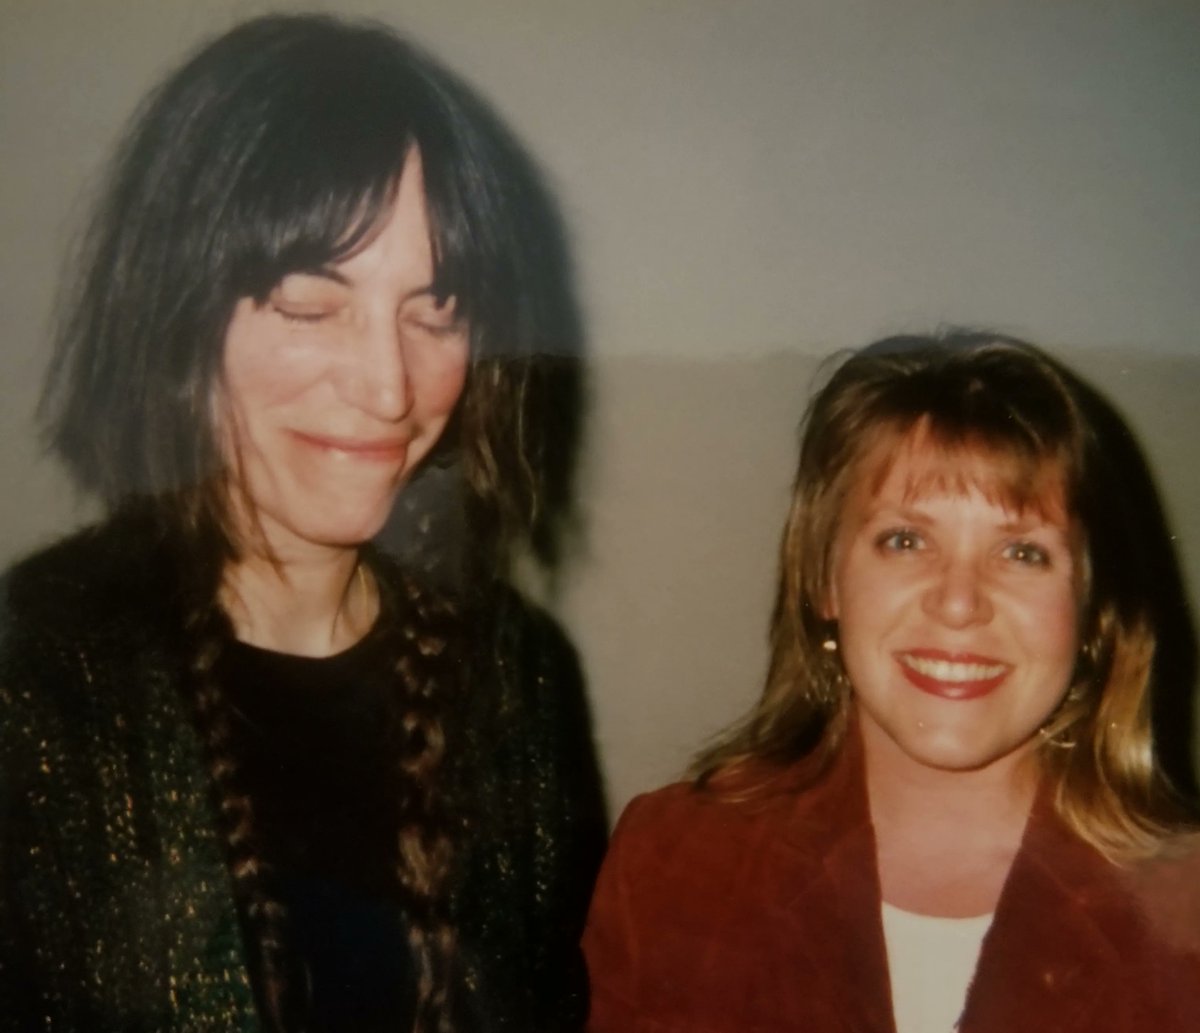 It's @JanetBardiniLAc with you until 10am. More #WomenWeLove this morning with selections from some of my faves, including the debut album from #PattiSmith, @HERMusicx and an #FUVLive performance from @AmyRay. Listen at 90.7FM, streaming at WFUV.org.